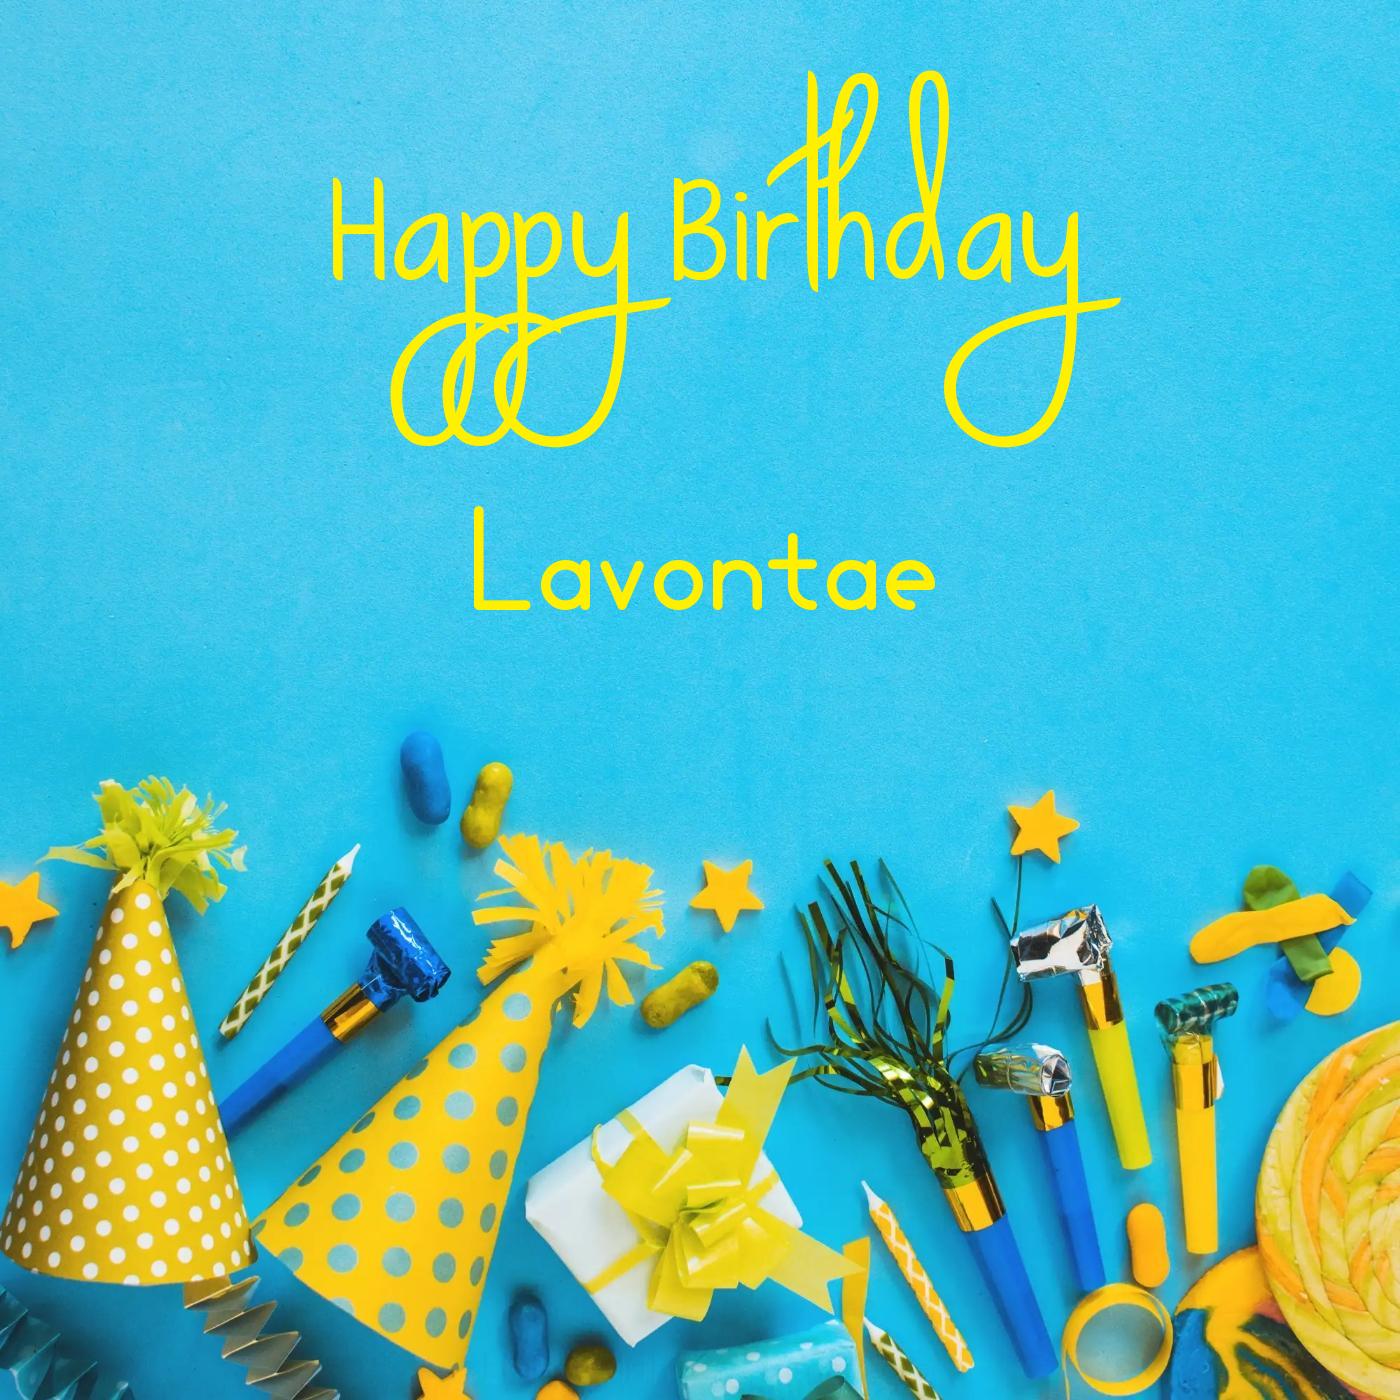 Happy Birthday Lavontae Party Accessories Card